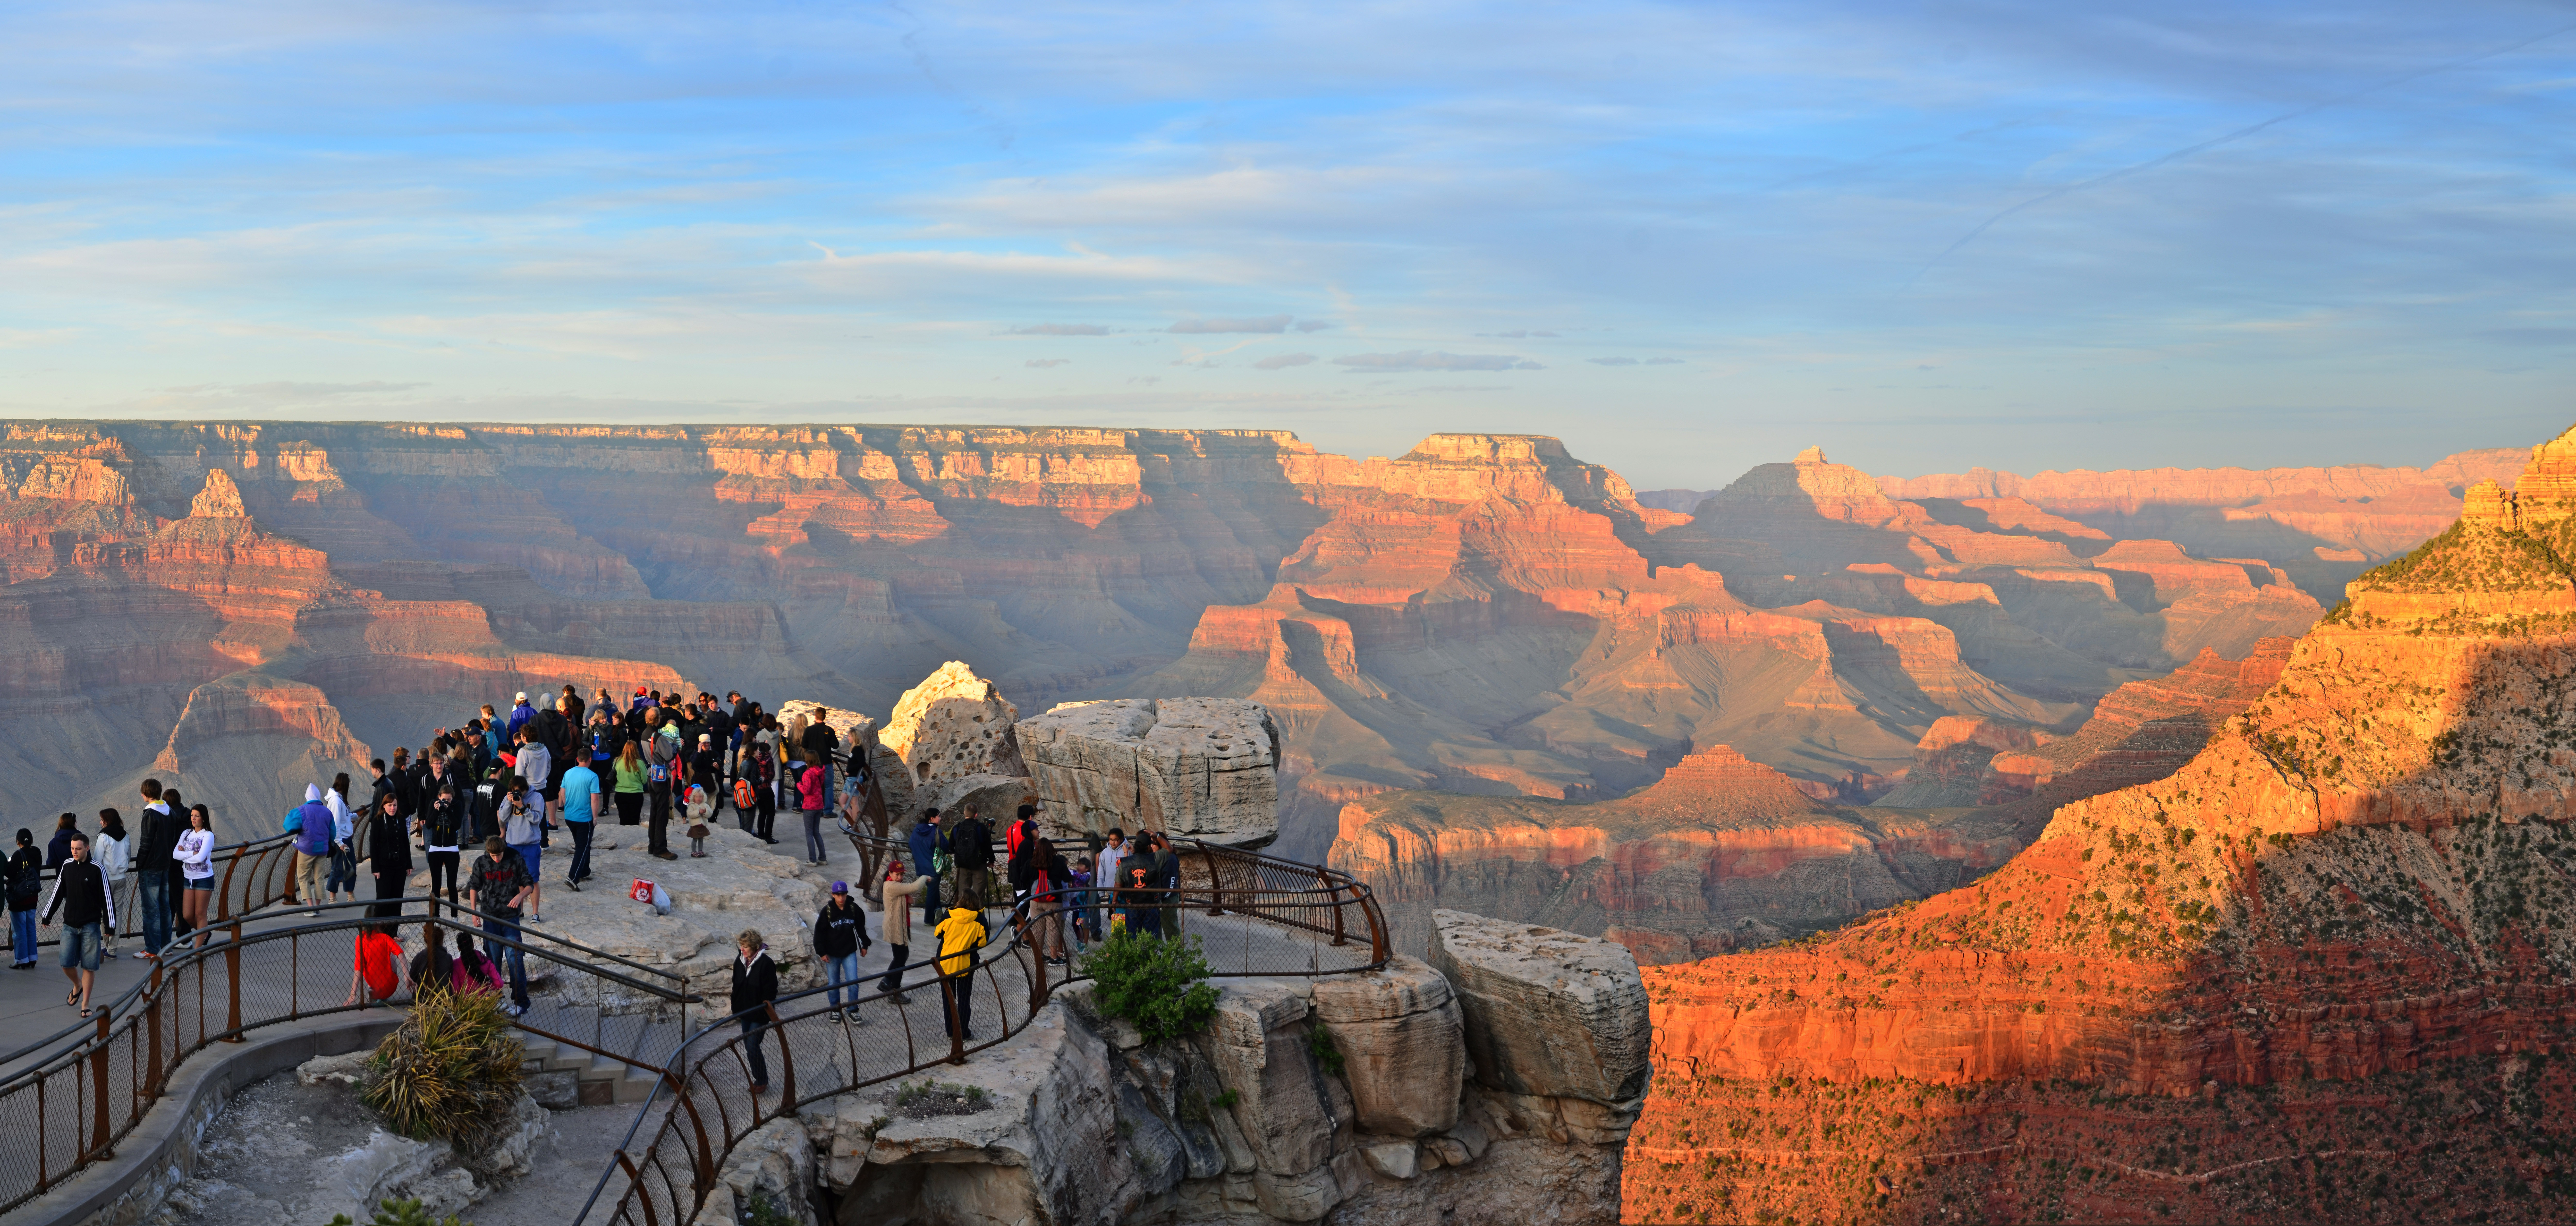 The canyon glows orange as people visit Mather Point, a rock outcropping that juts into Grand Canyon